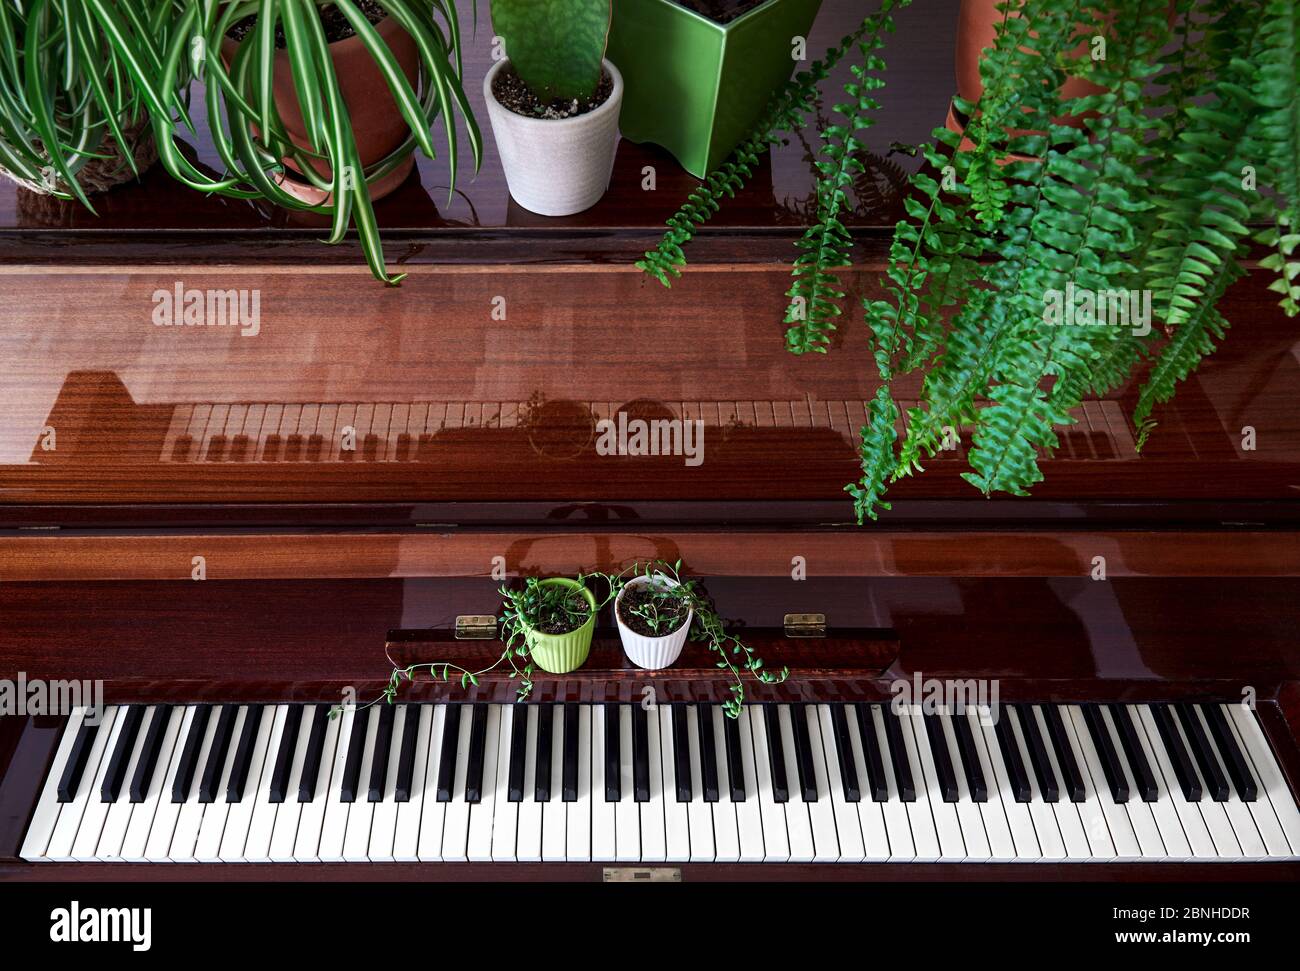 Old vintage piano with various green home plants in the pots top view in the room Stock Photo